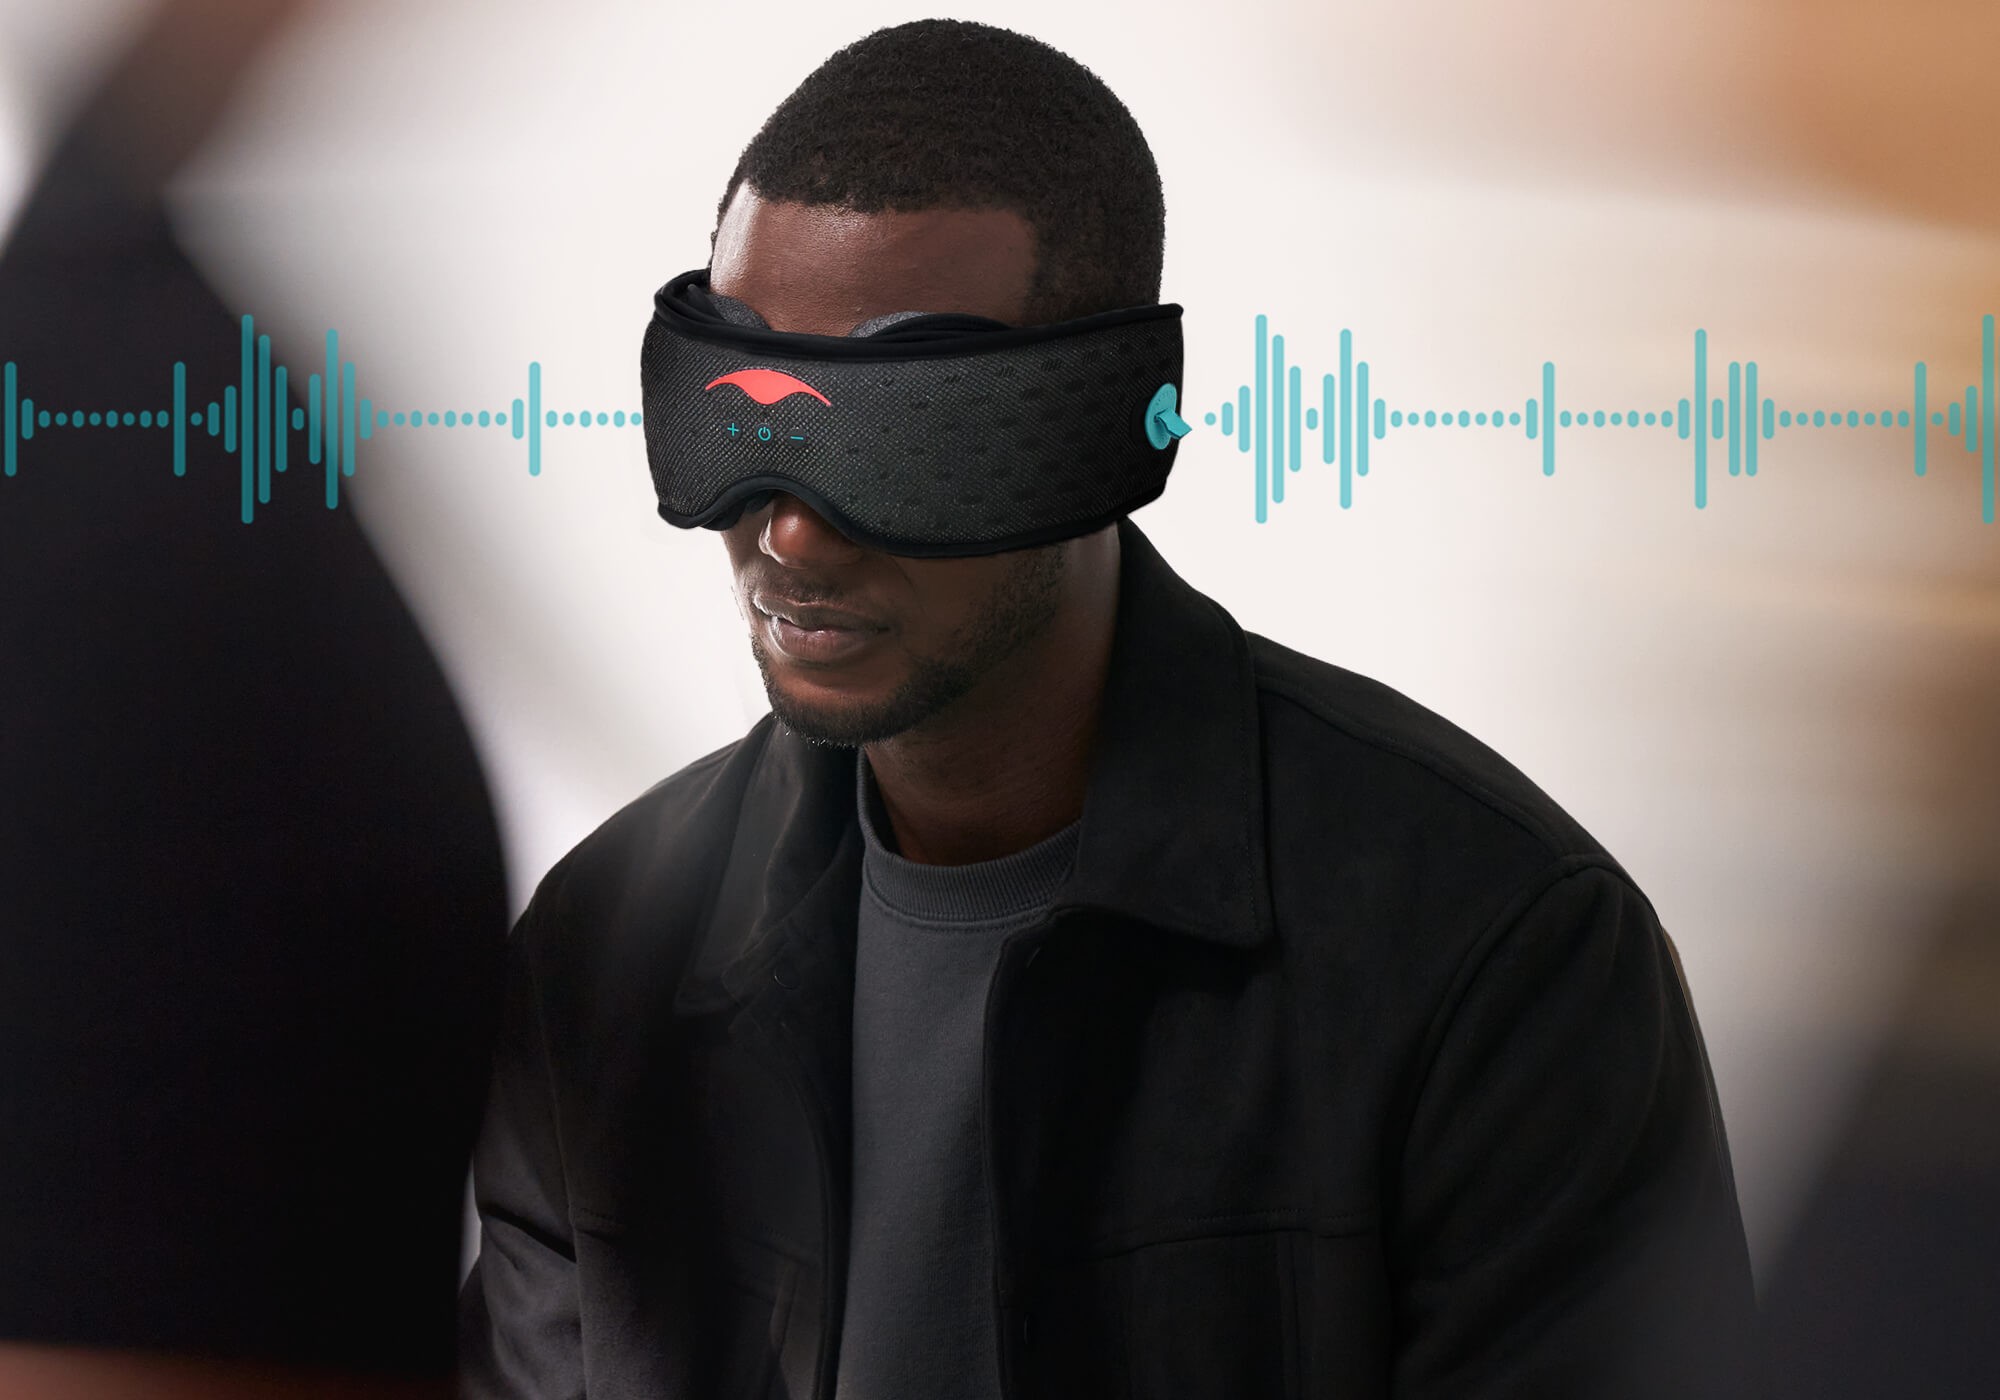 A man in a black shirt wearing a mens sleep mask with built-in Bluetooth speakers.